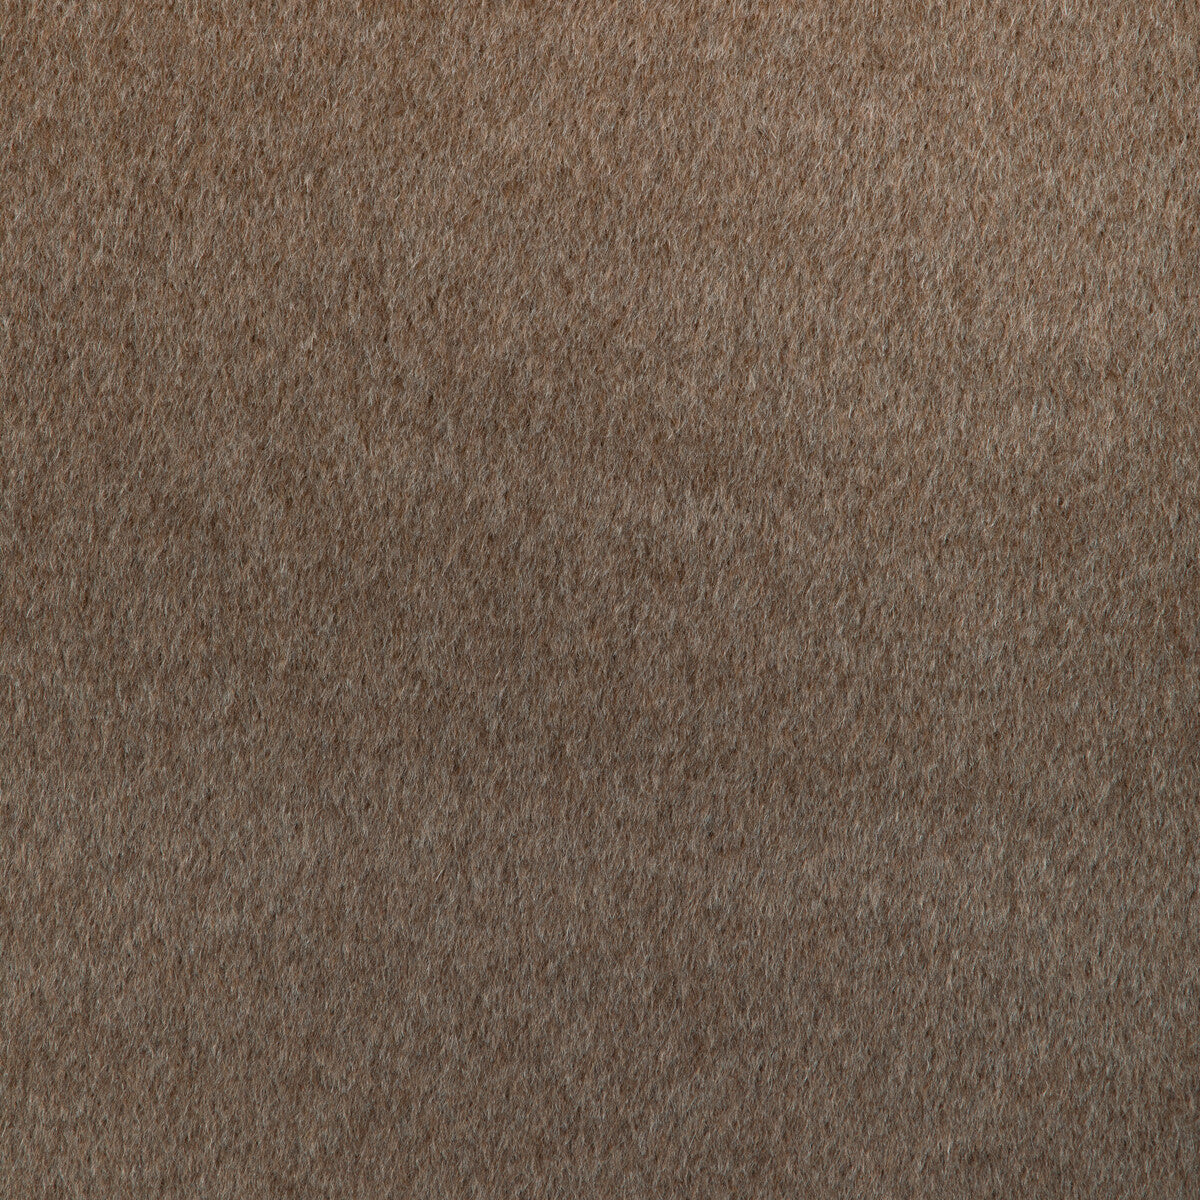 Alpaca Drift fabric in umber color - pattern 36872.6.0 - by Kravet Couture in the Atelier Weaves collection